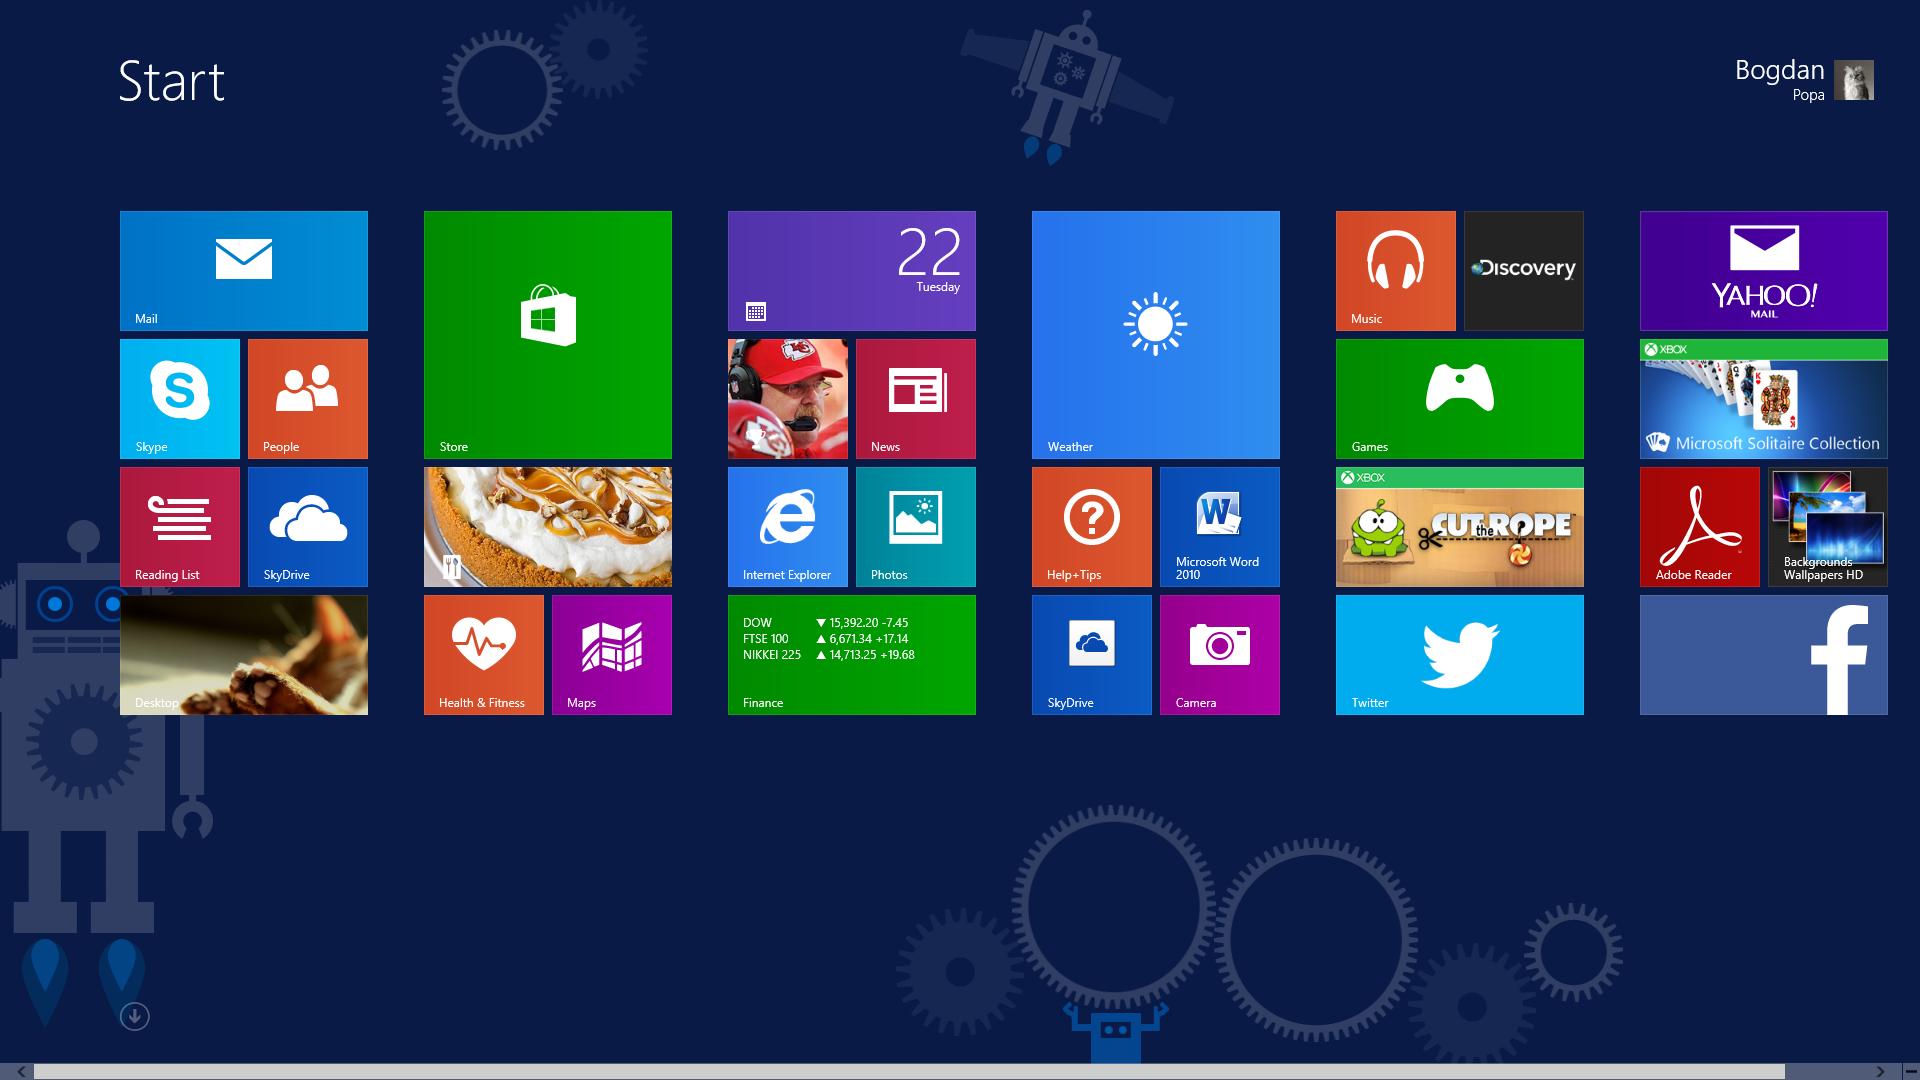 Win86emu For Rt Download